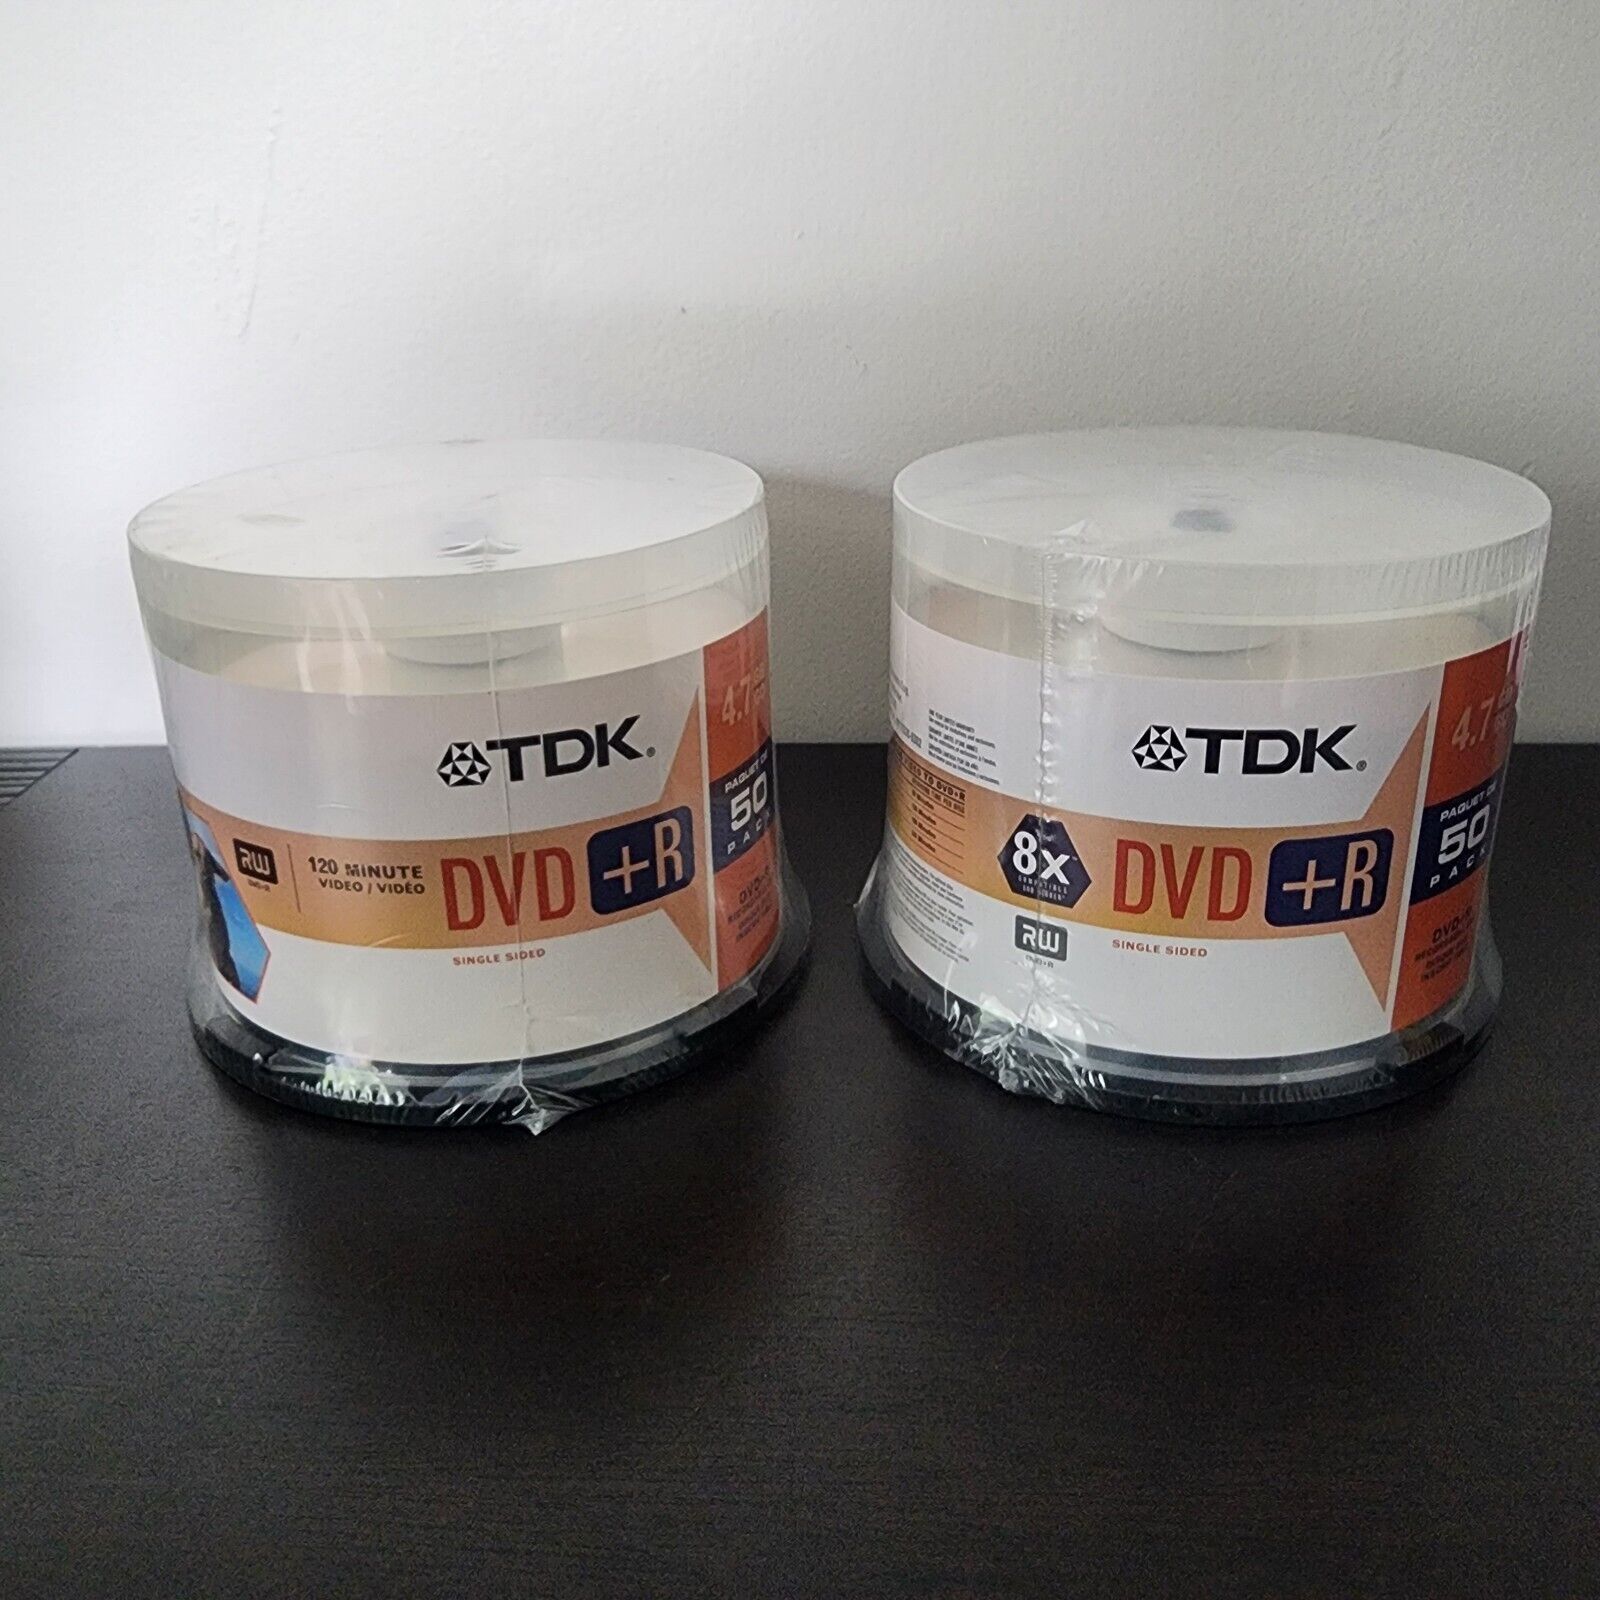 TWO PACK: TDK DVD+R 50 Pack Spindleof Disks, 4.7GB, 8x, NEW SEALED 100 Ttl DVD+R